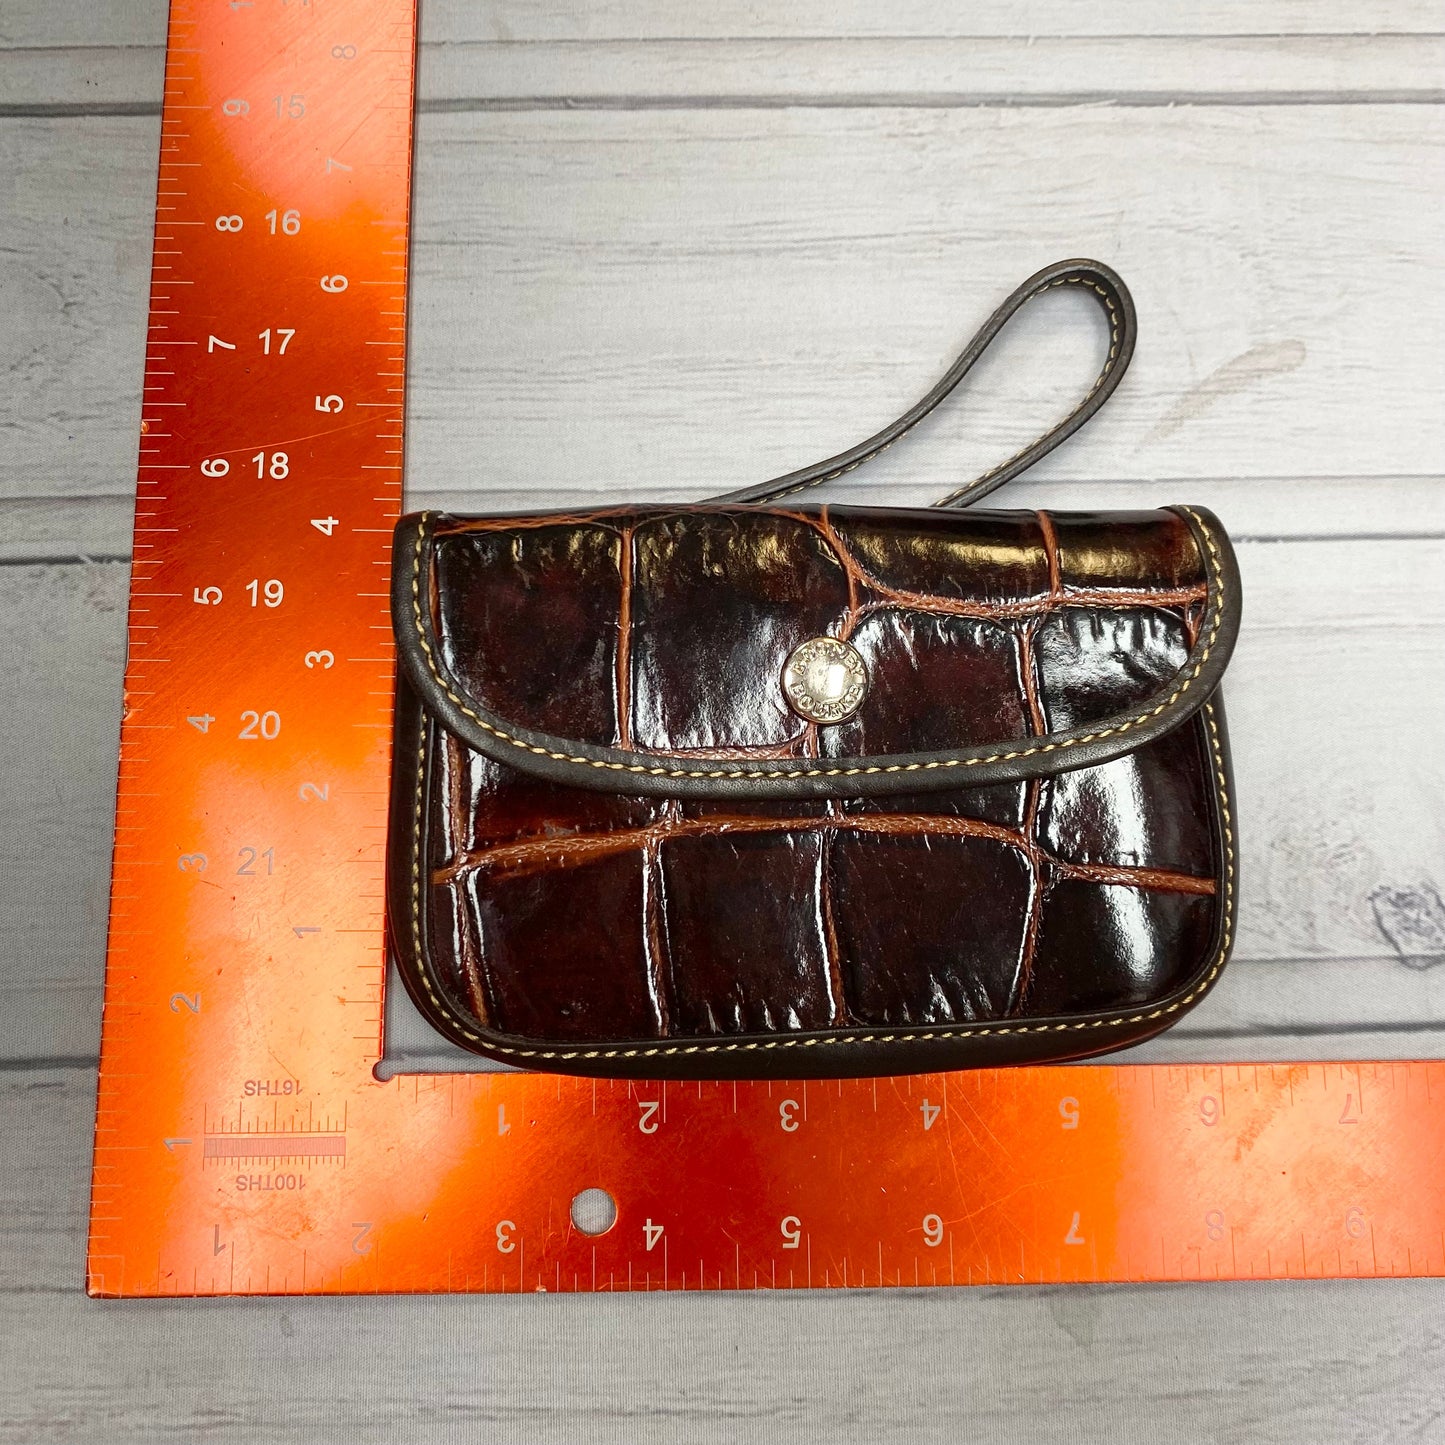 Wristlet Designer By Dooney And Bourke  Size: Small